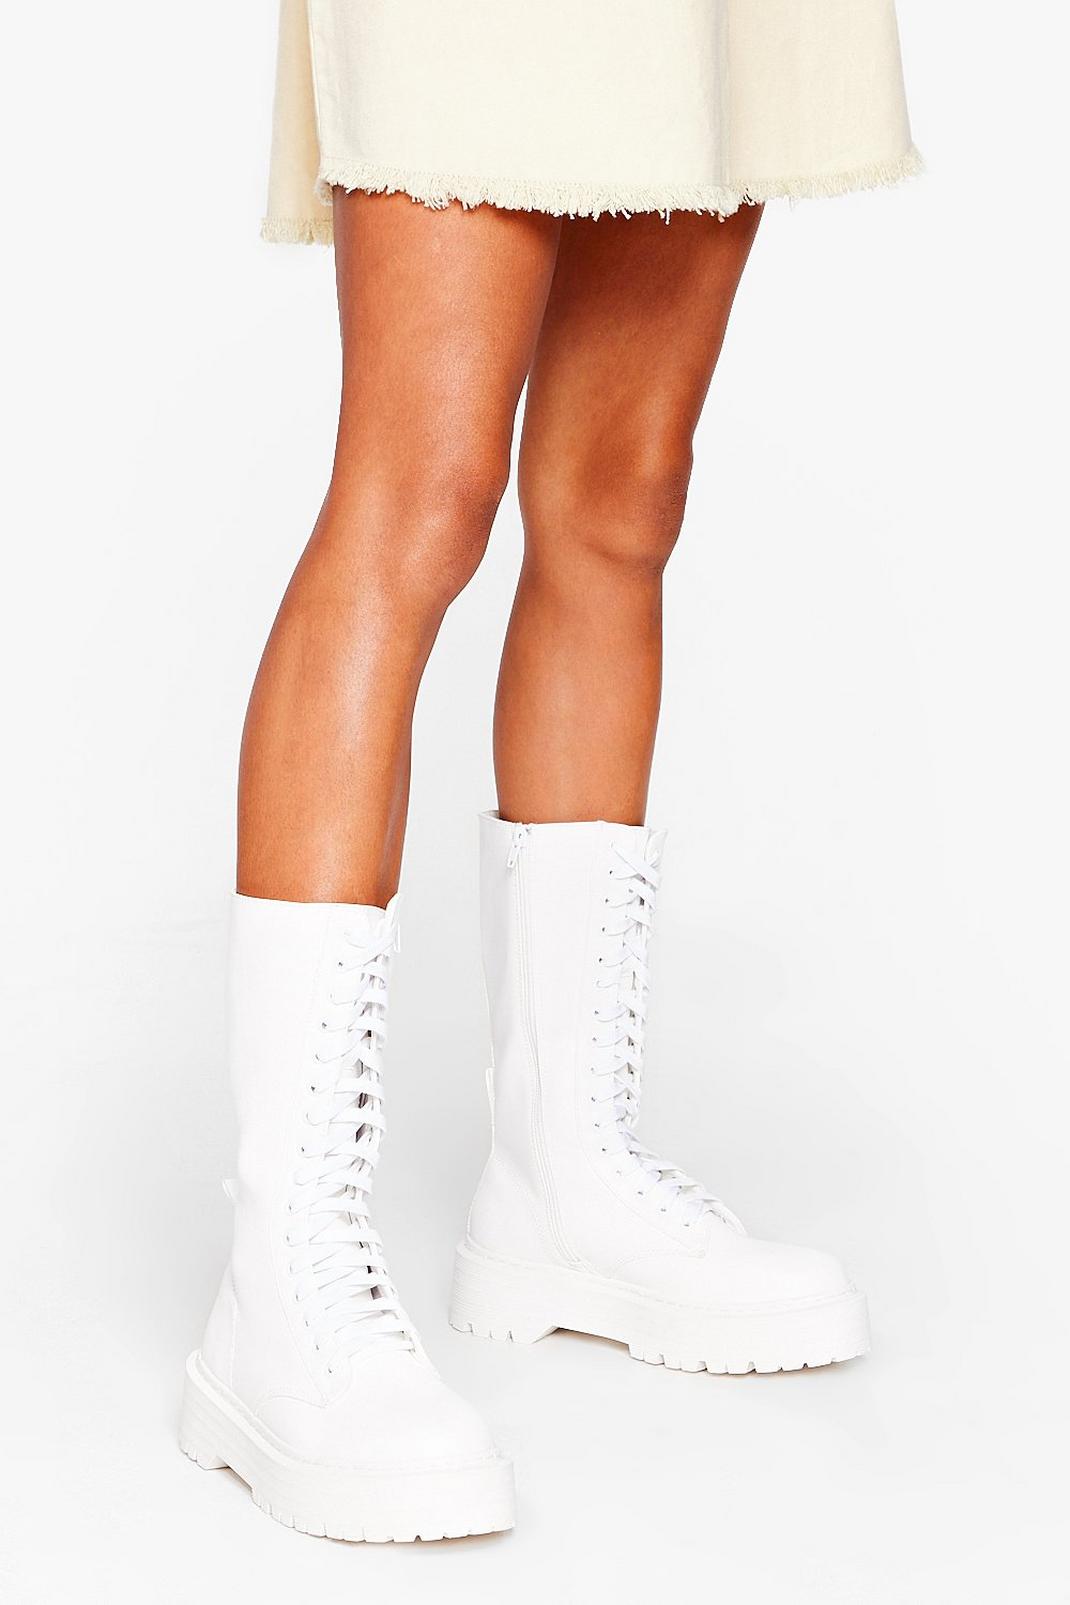 Our Feet Keep Dancing Cleated Calf High Boots | Nasty Gal